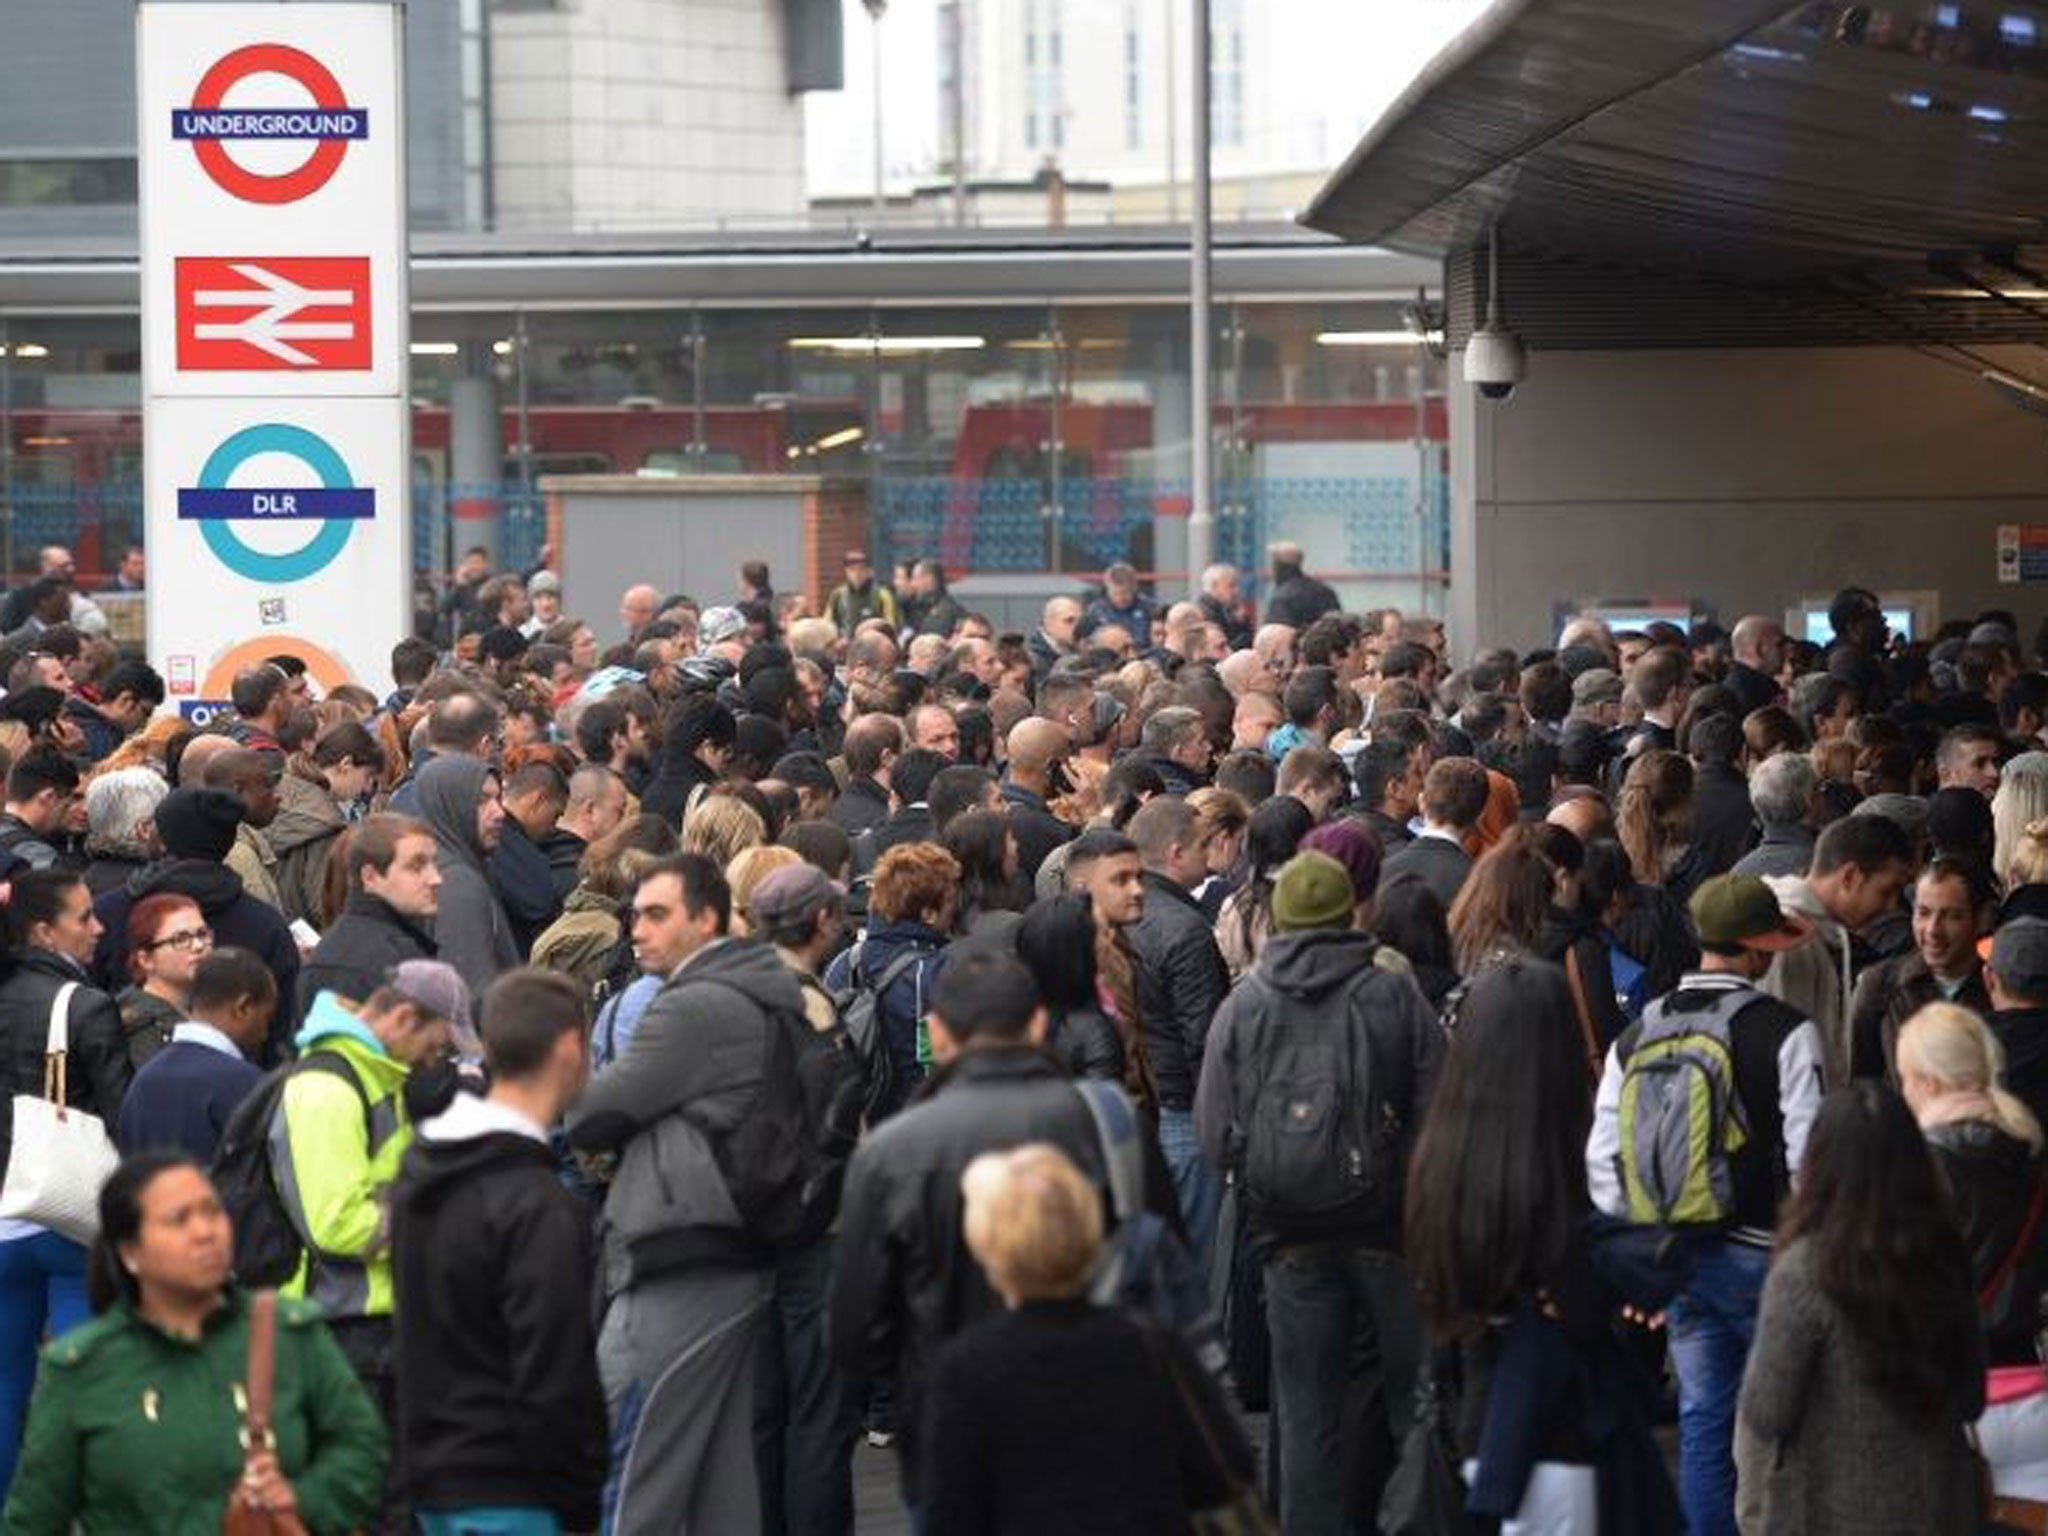 London Tube strike latest Delays and suspended lines across network